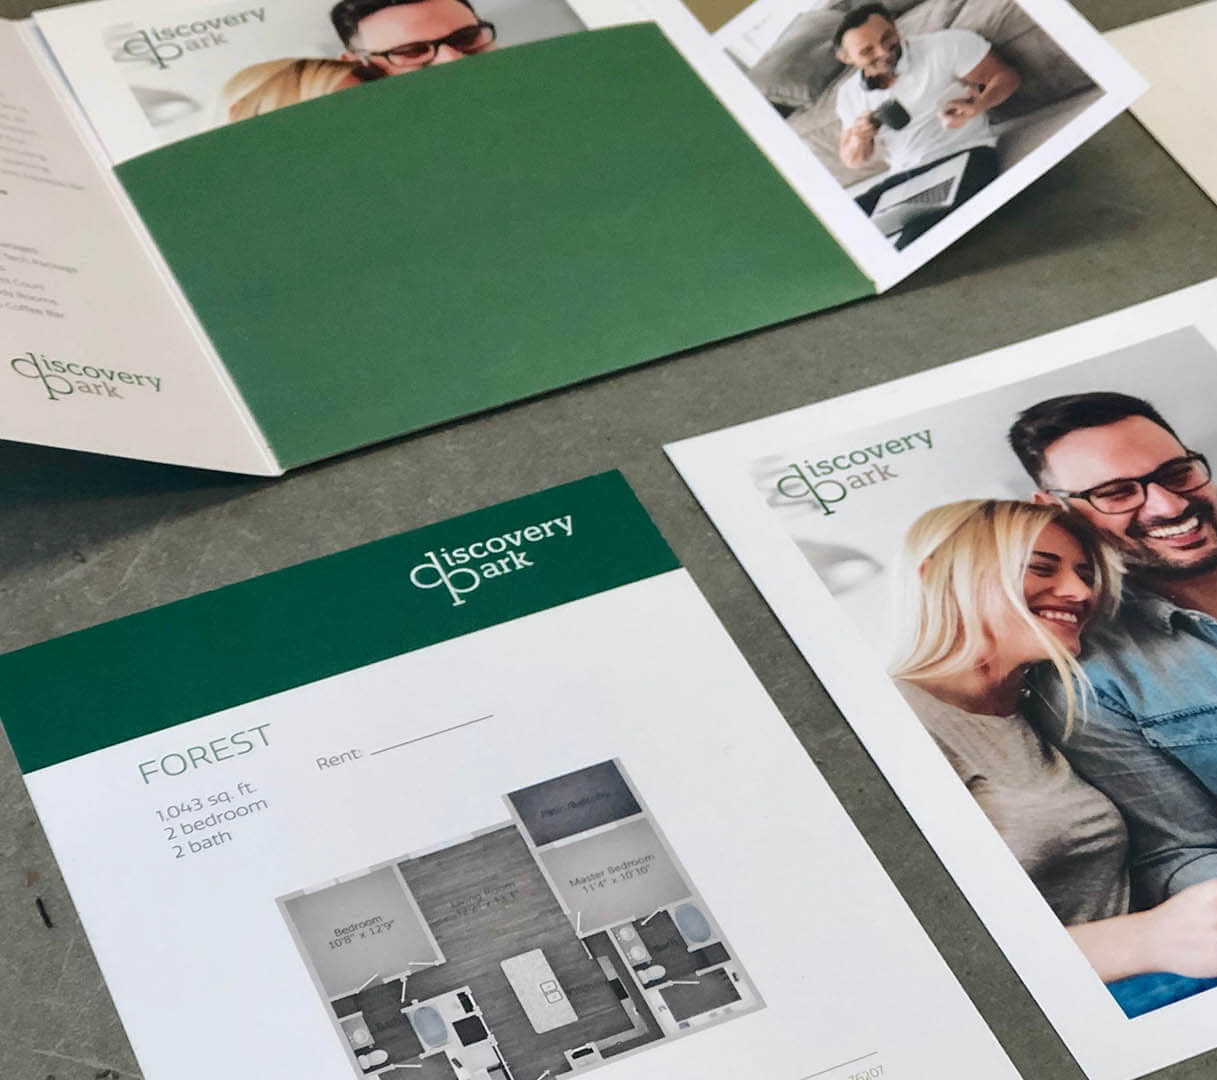 An example of multifamily marketing collateral we designed for our client Discovery Park as part of our multifamily branding services at Criterion.B.